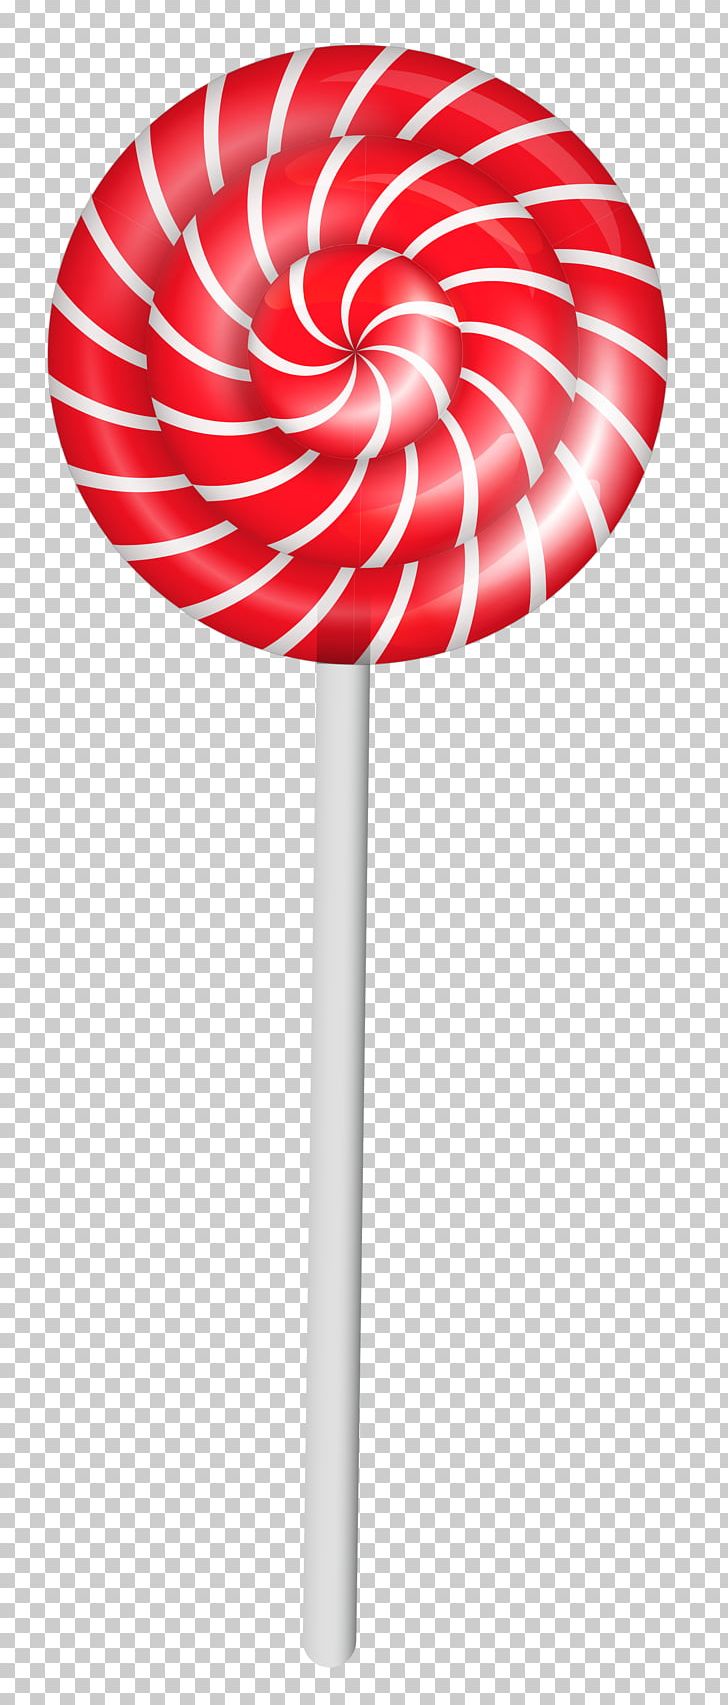 Lollipop Candy Cane Cotton Candy PNG, Clipart, Candy, Candy Cane, Christmas, Confectionery, Cotton Candy Free PNG Download